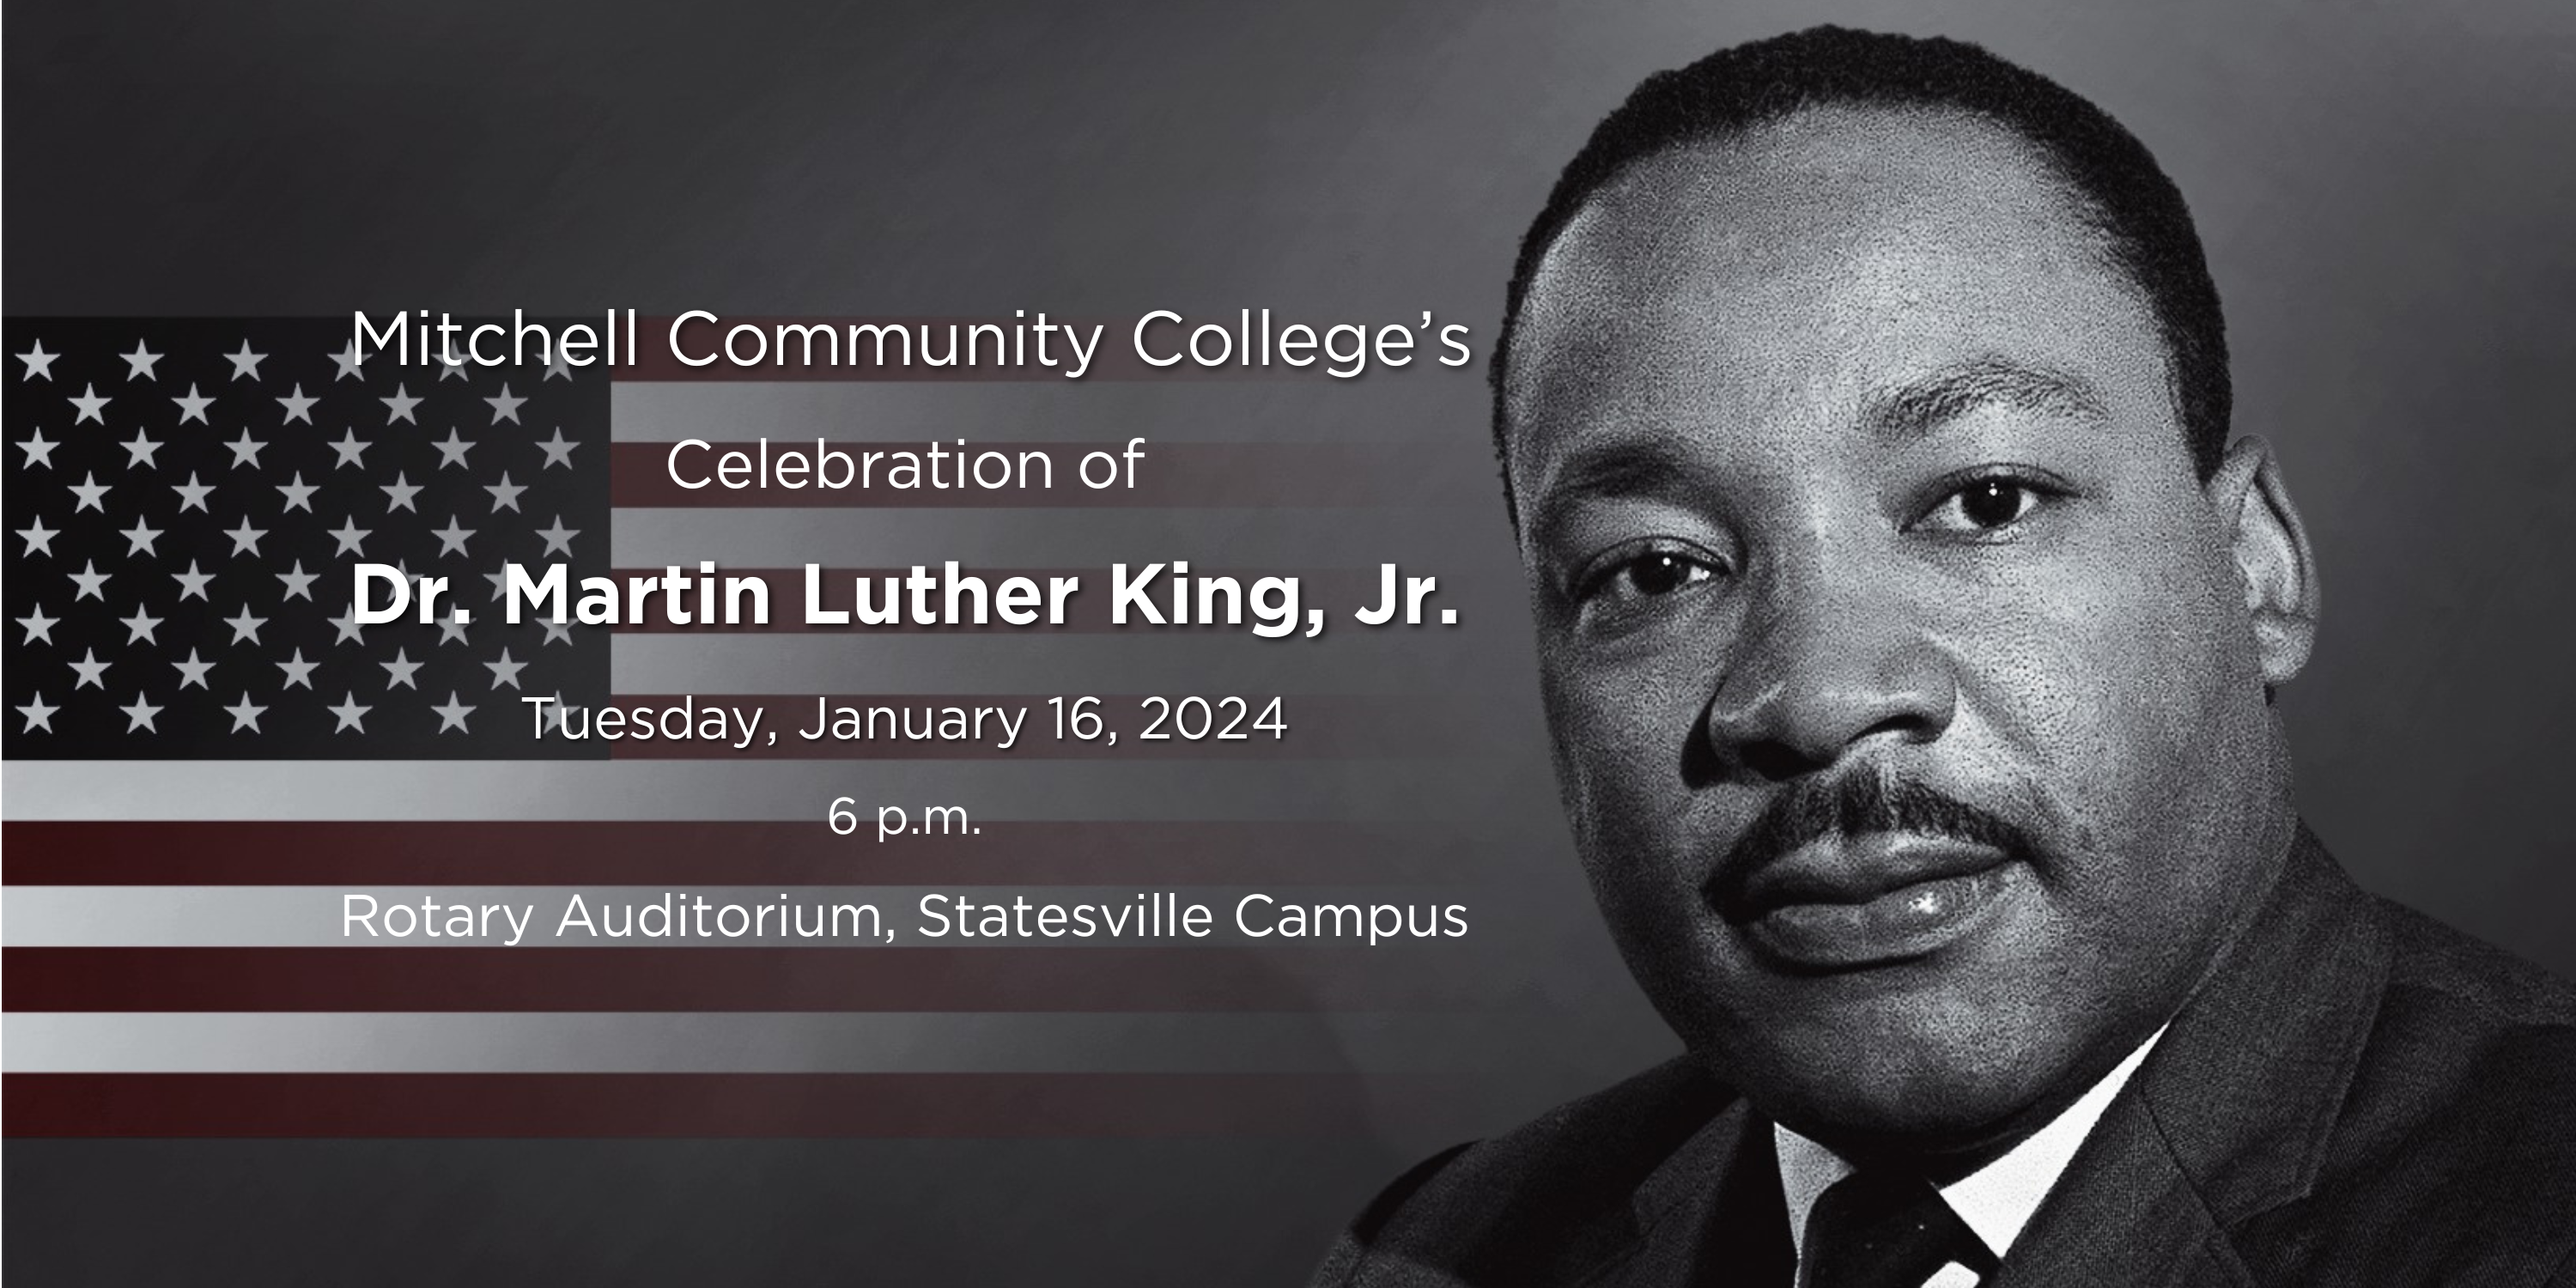 Banner that reads "Mitchell Community College's Celebration of Dr. Martin Luther King, Jr. | Tuesday, January 16, 2024 | 6 p.m. | Rotary Auditorium, Statesville Campus." Click the banner to learn more.